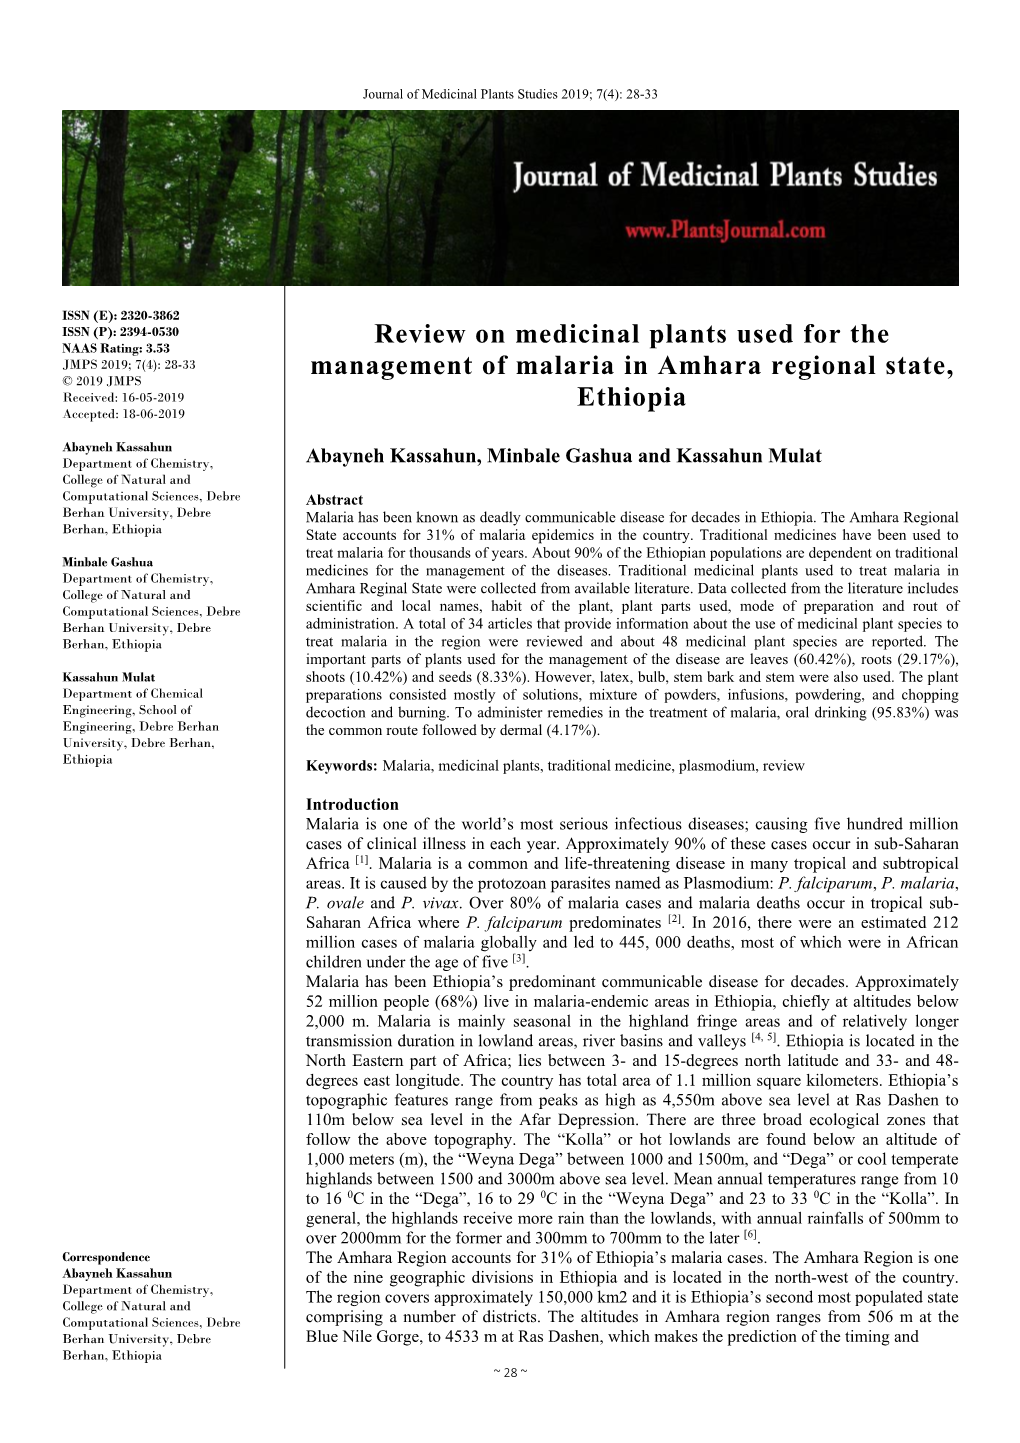 Review on Medicinal Plants Used for the Management of Malaria in Amhara Regional State, Ethiopia